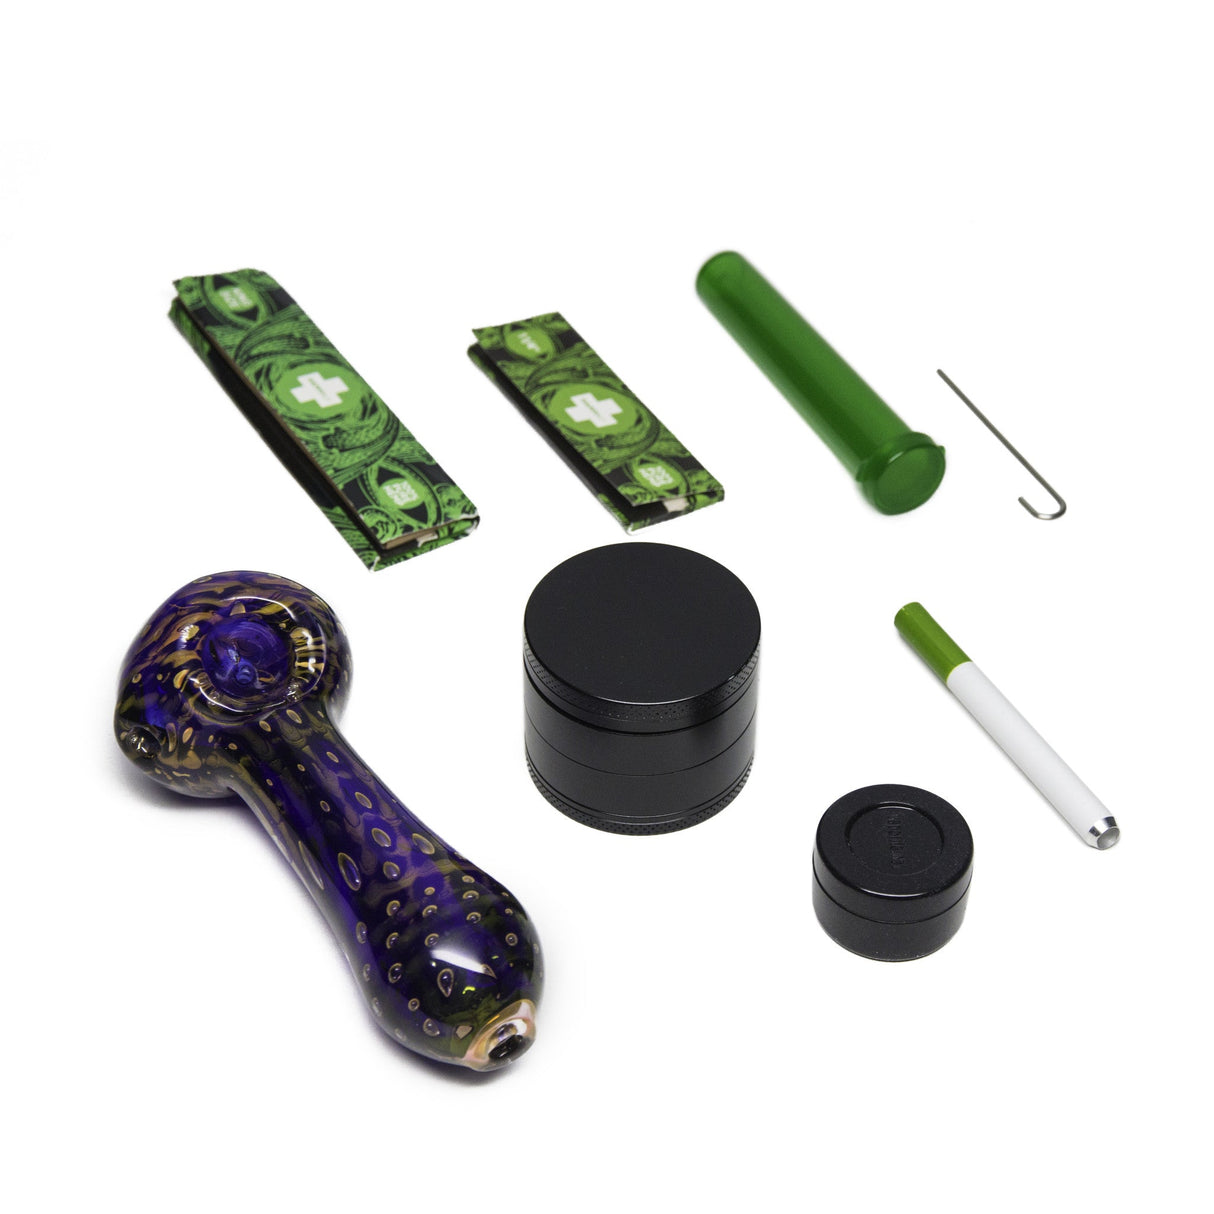 The Very Happy Kit by Happy Kit with glass pipe, grinder, doob tubes, and one-hitter - top view